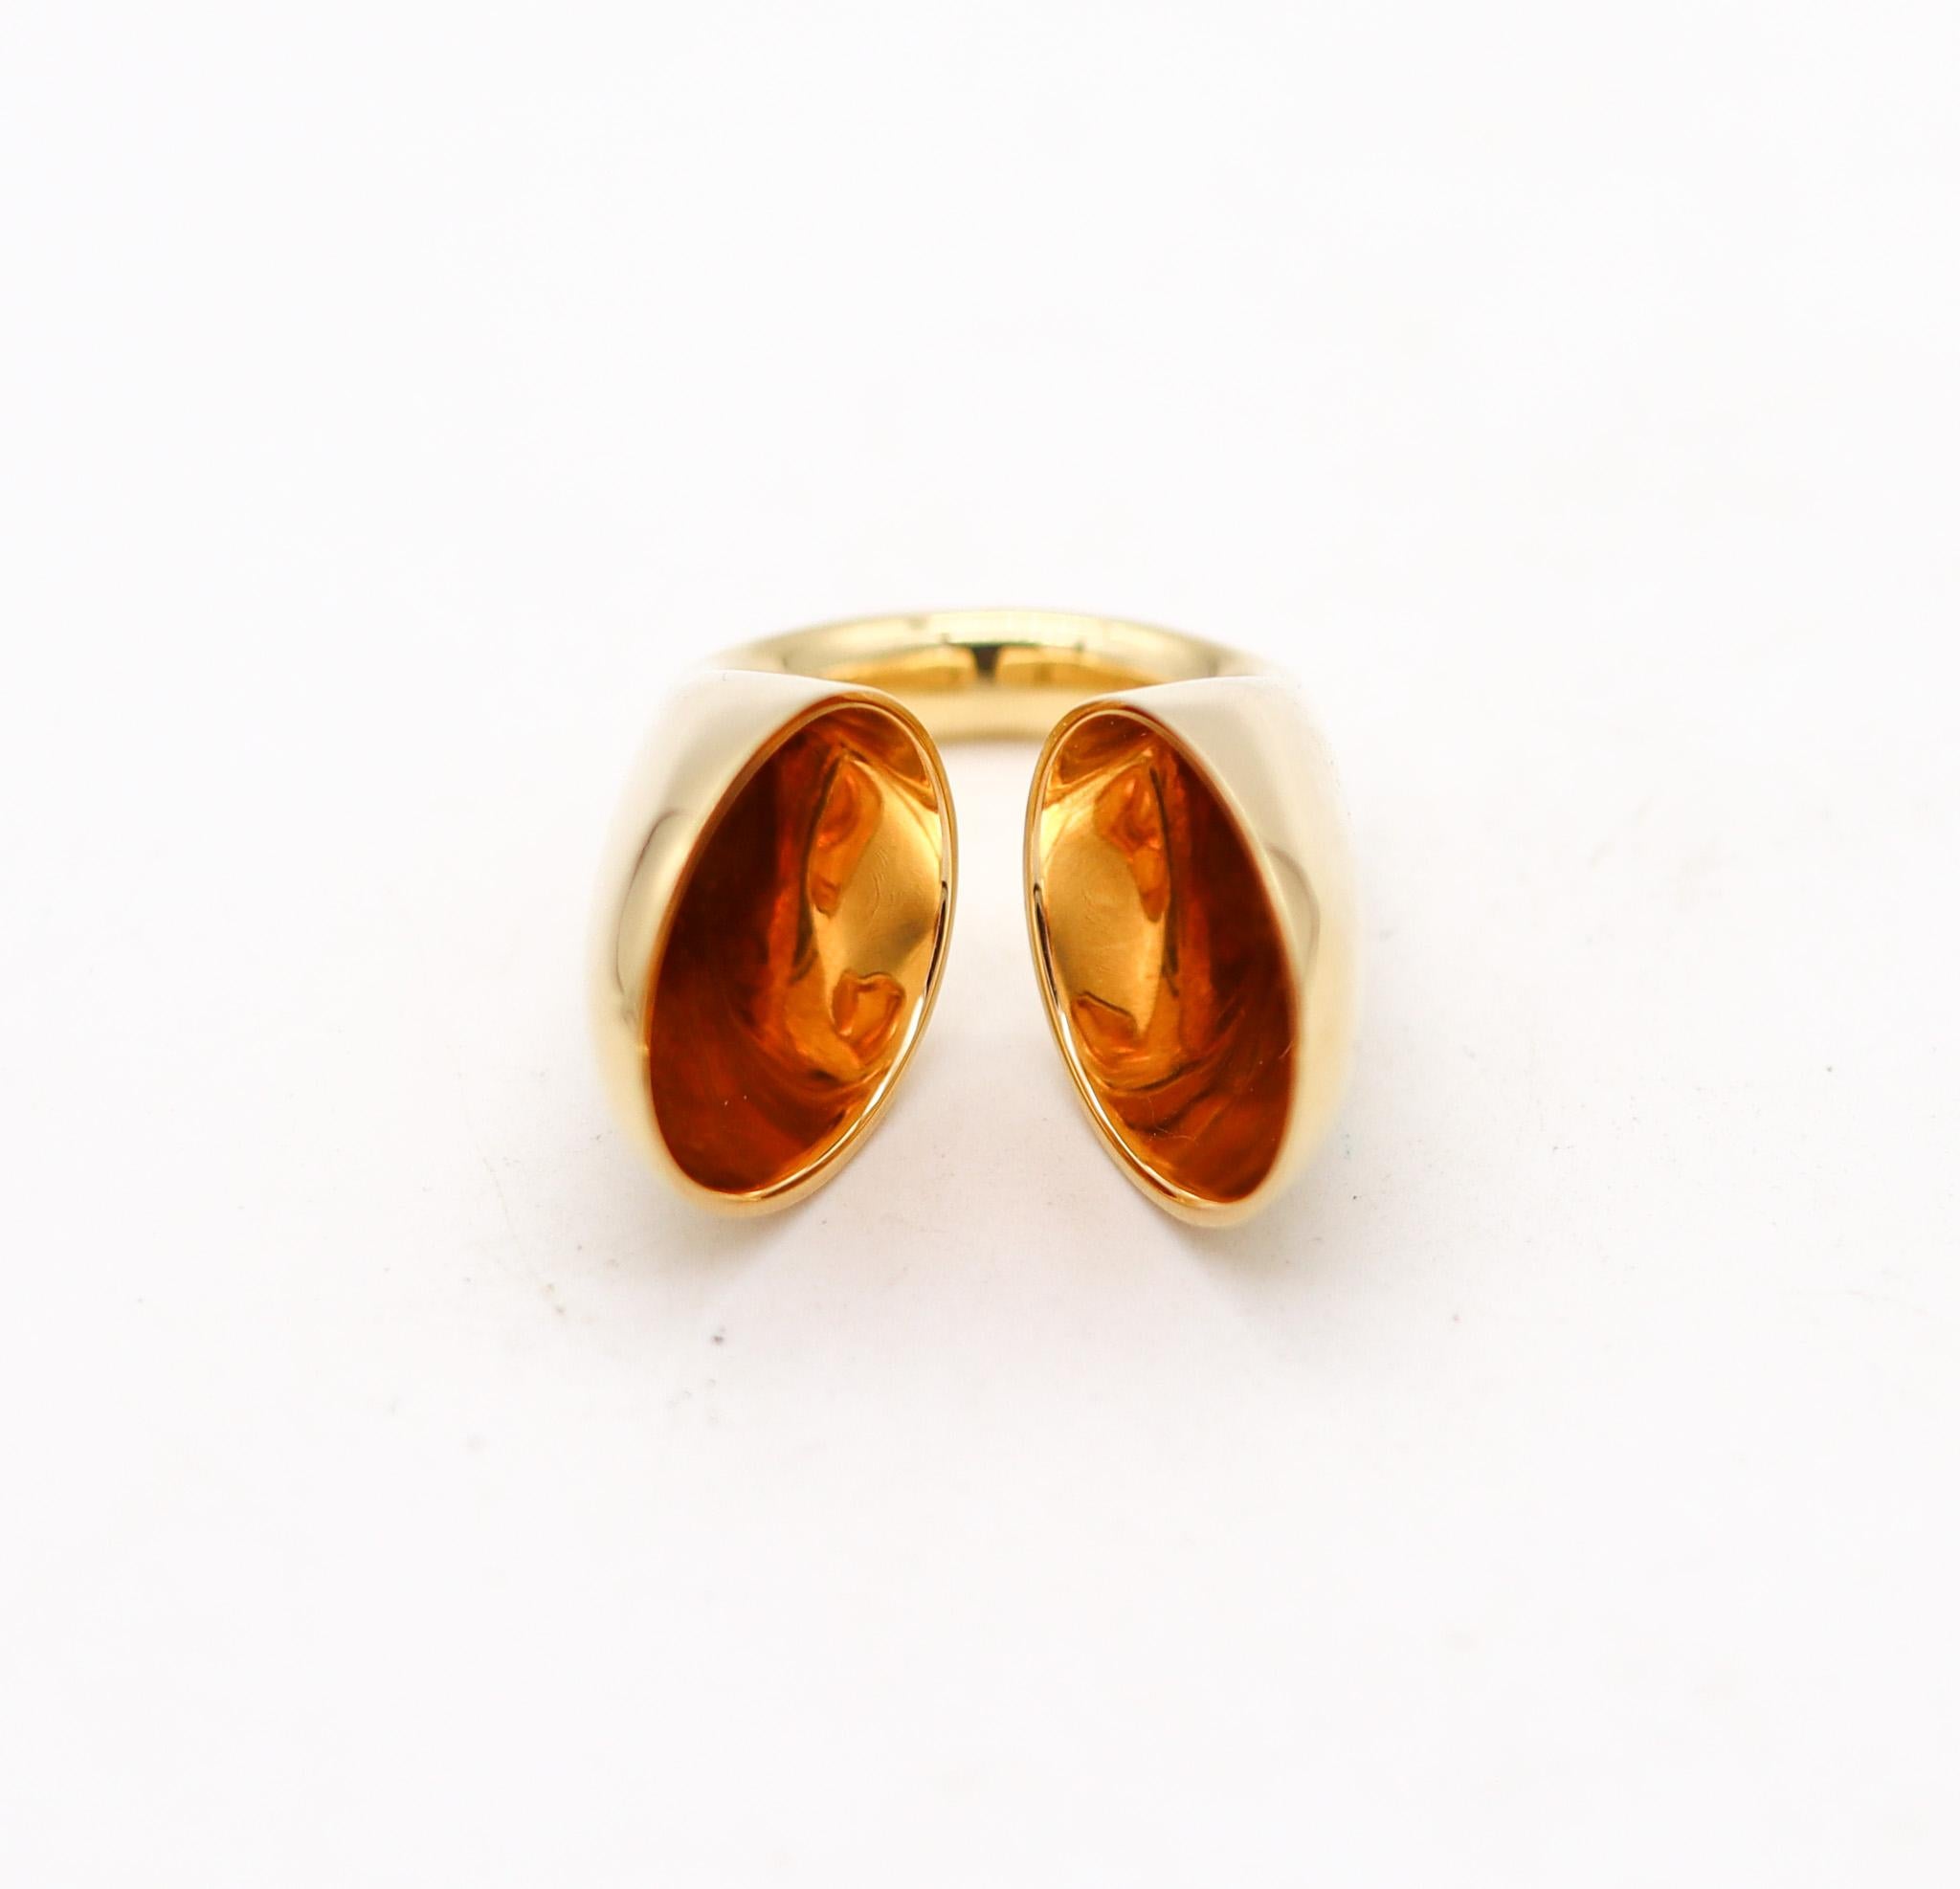 Vram Minassian Modernist Sculptural Echo Ring In Polished 18Kt Yellow Gold In Excellent Condition For Sale In Miami, FL